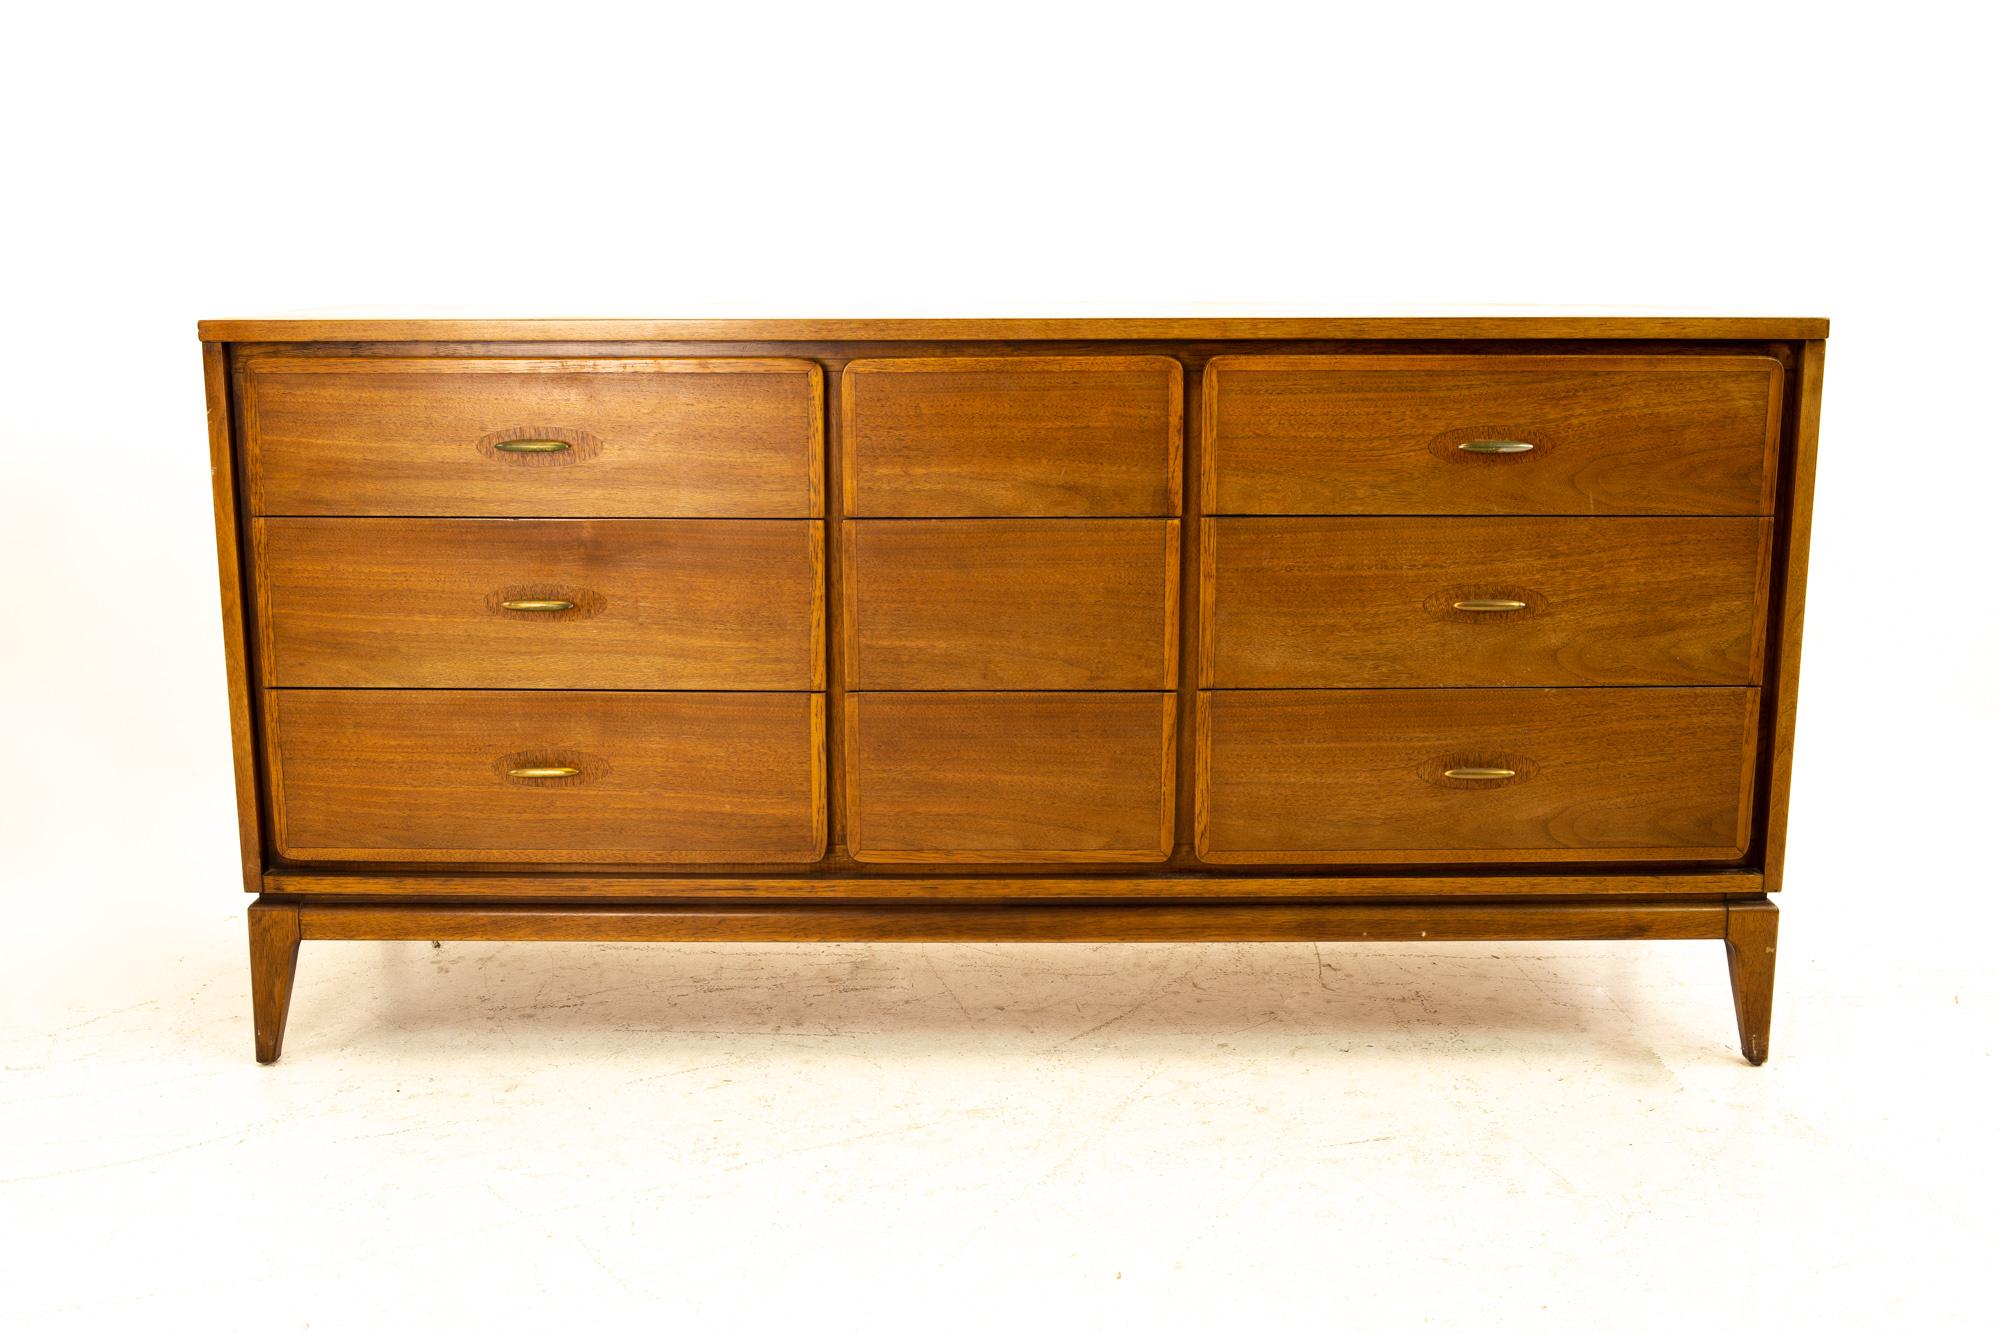 Kent Coffey simplex II midcentury walnut and brass lowboy dresser
Dresser measures: 64 wide x 18.5 deep x 31.25 high

All pieces of furniture can be had in what we call restored vintage condition. That means the piece is restored upon purchase so